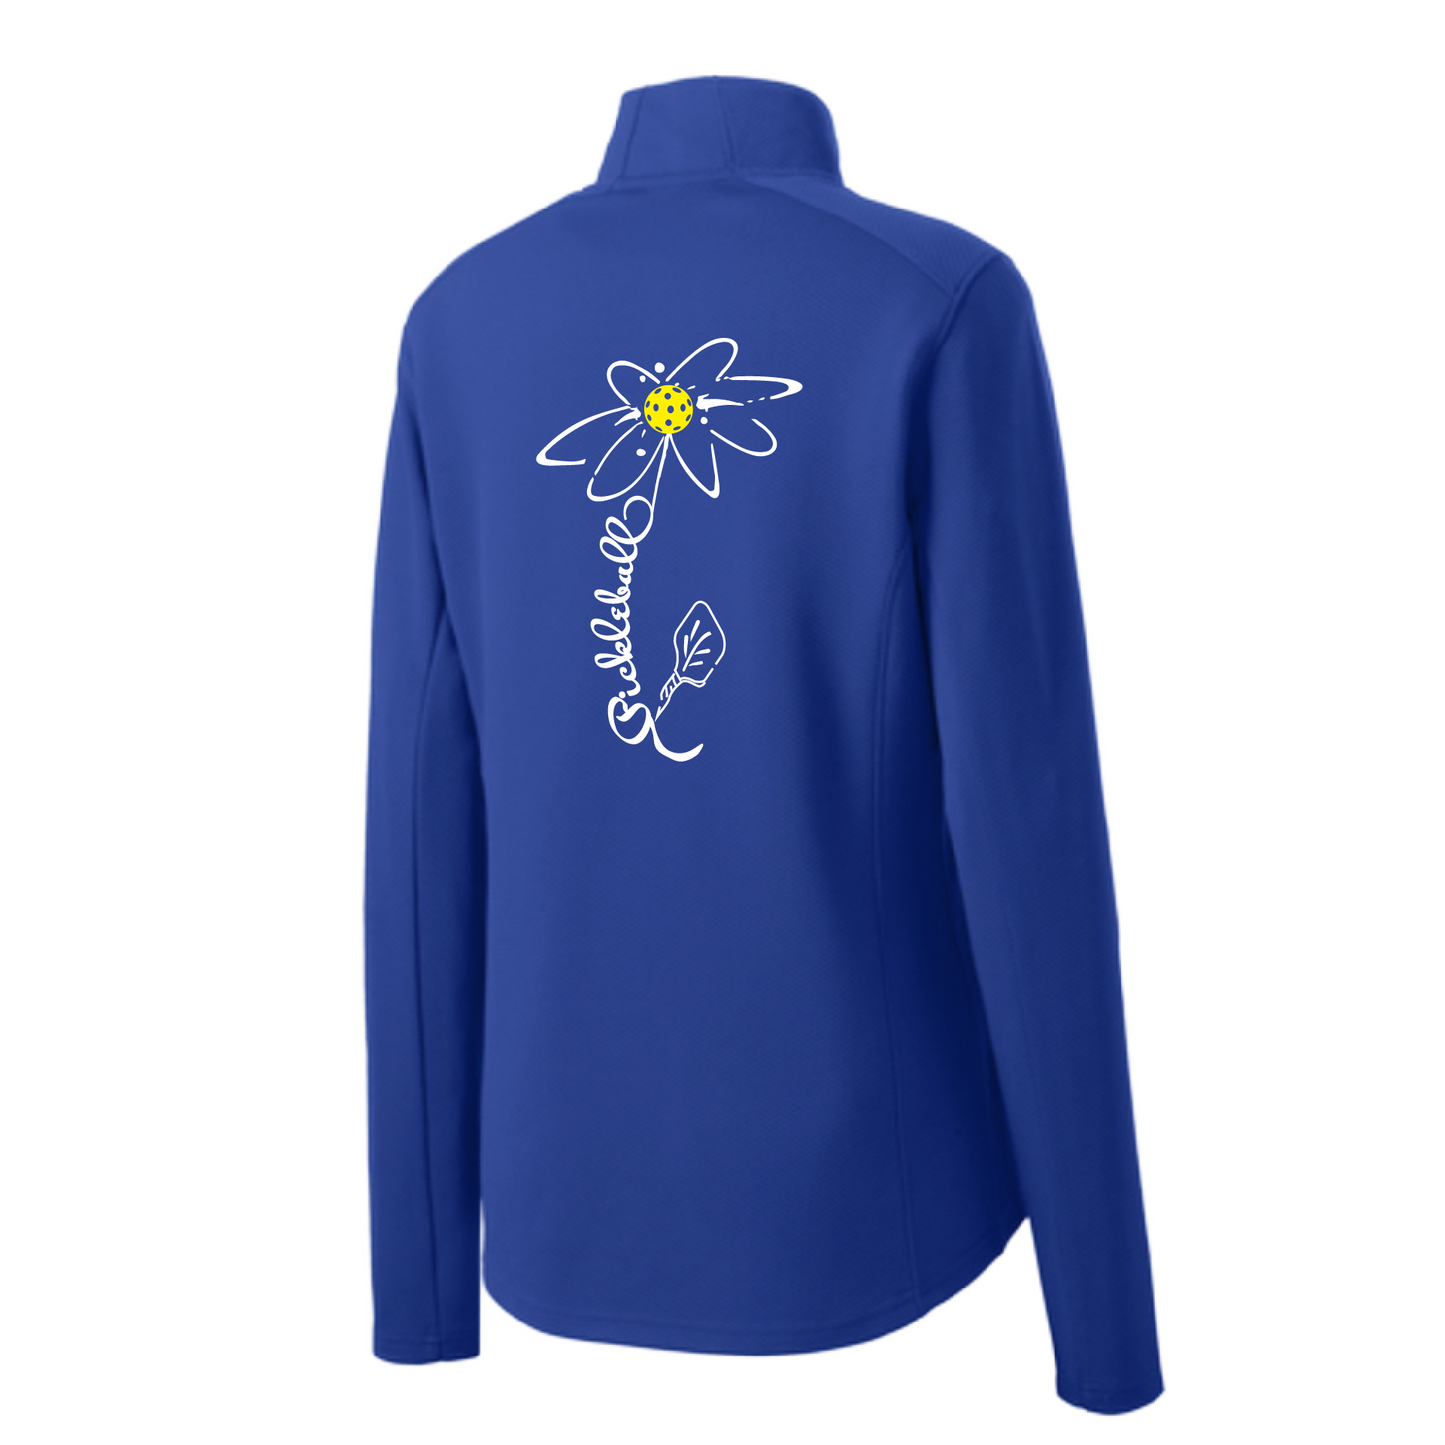 Pickleball Design: Pickleball Flower  Women's 1/4-Zip Pullover: Princess seams and drop tail hem.  Turn up the volume in this Women's shirt with its perfect mix of softness and attitude. Material is ultra-comfortable with moisture wicking properties and tri-blend softness. PosiCharge technology locks in color. Highly breathable and lightweight. Versatile enough for wearing year-round.